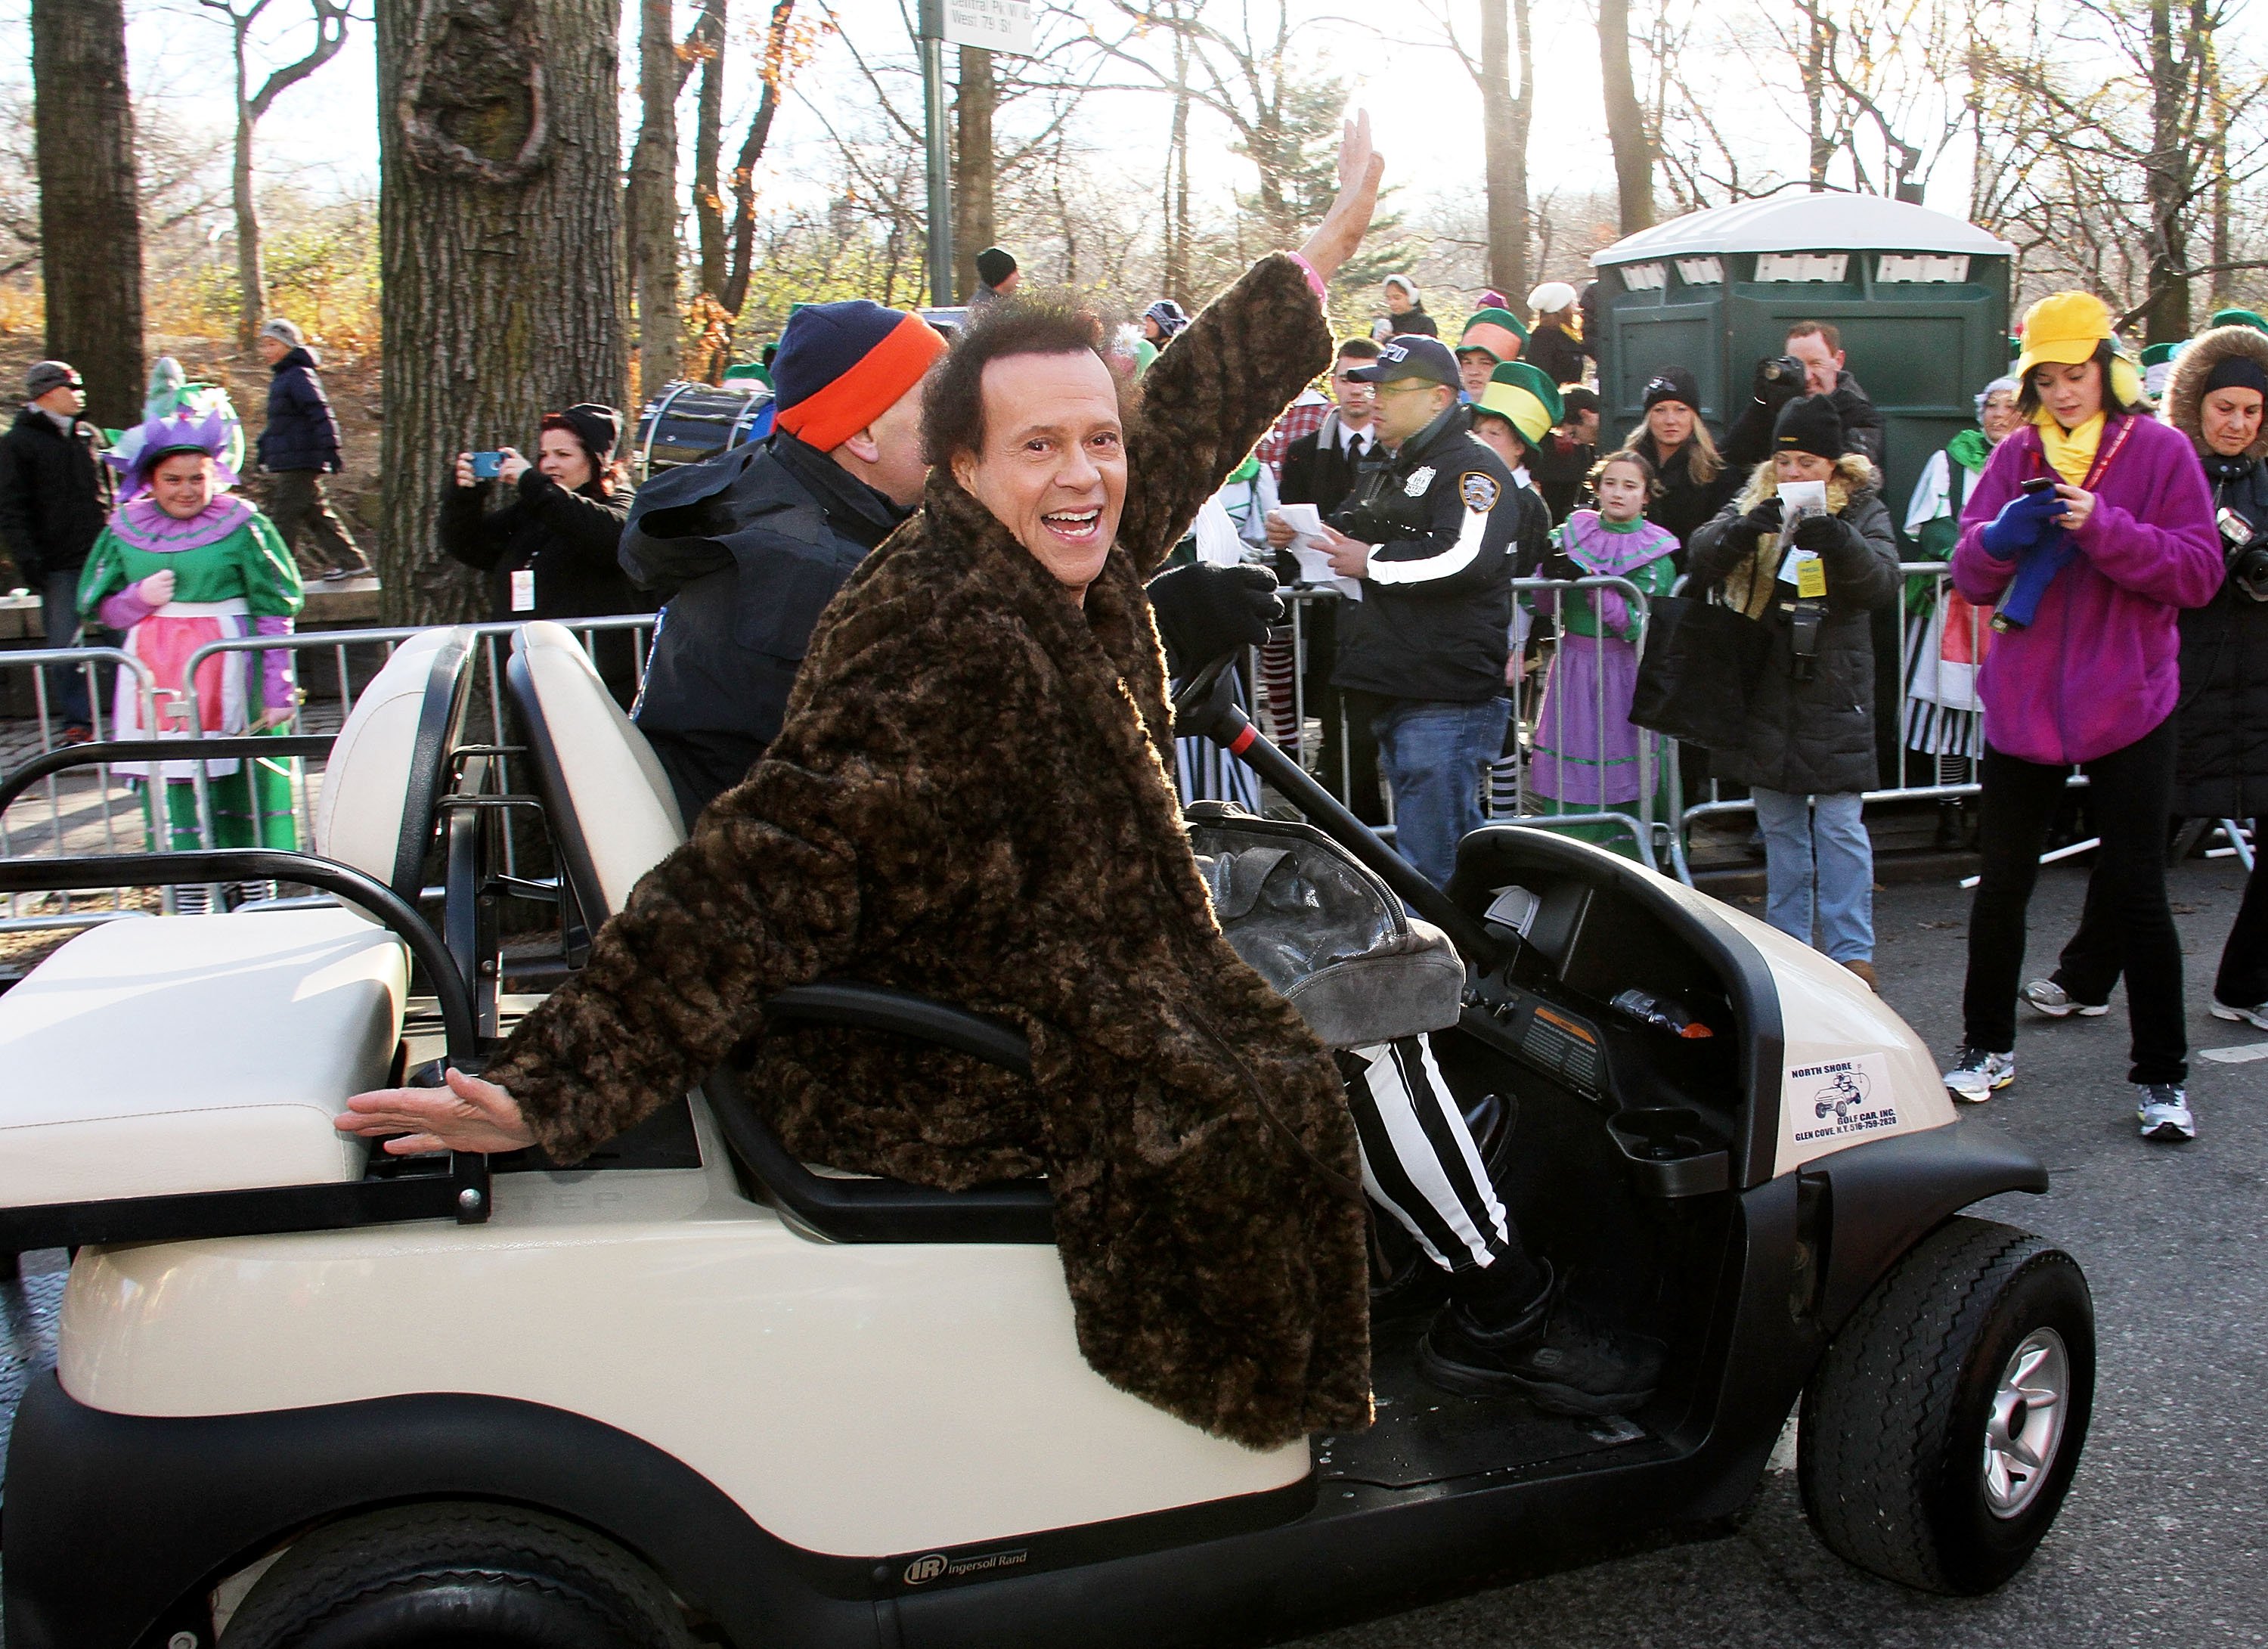 Richard Simmons attends the 87th Annual Macy's Thanksgiving Day Parade on November 28, 2013 in New York City. | Source: Getty Images